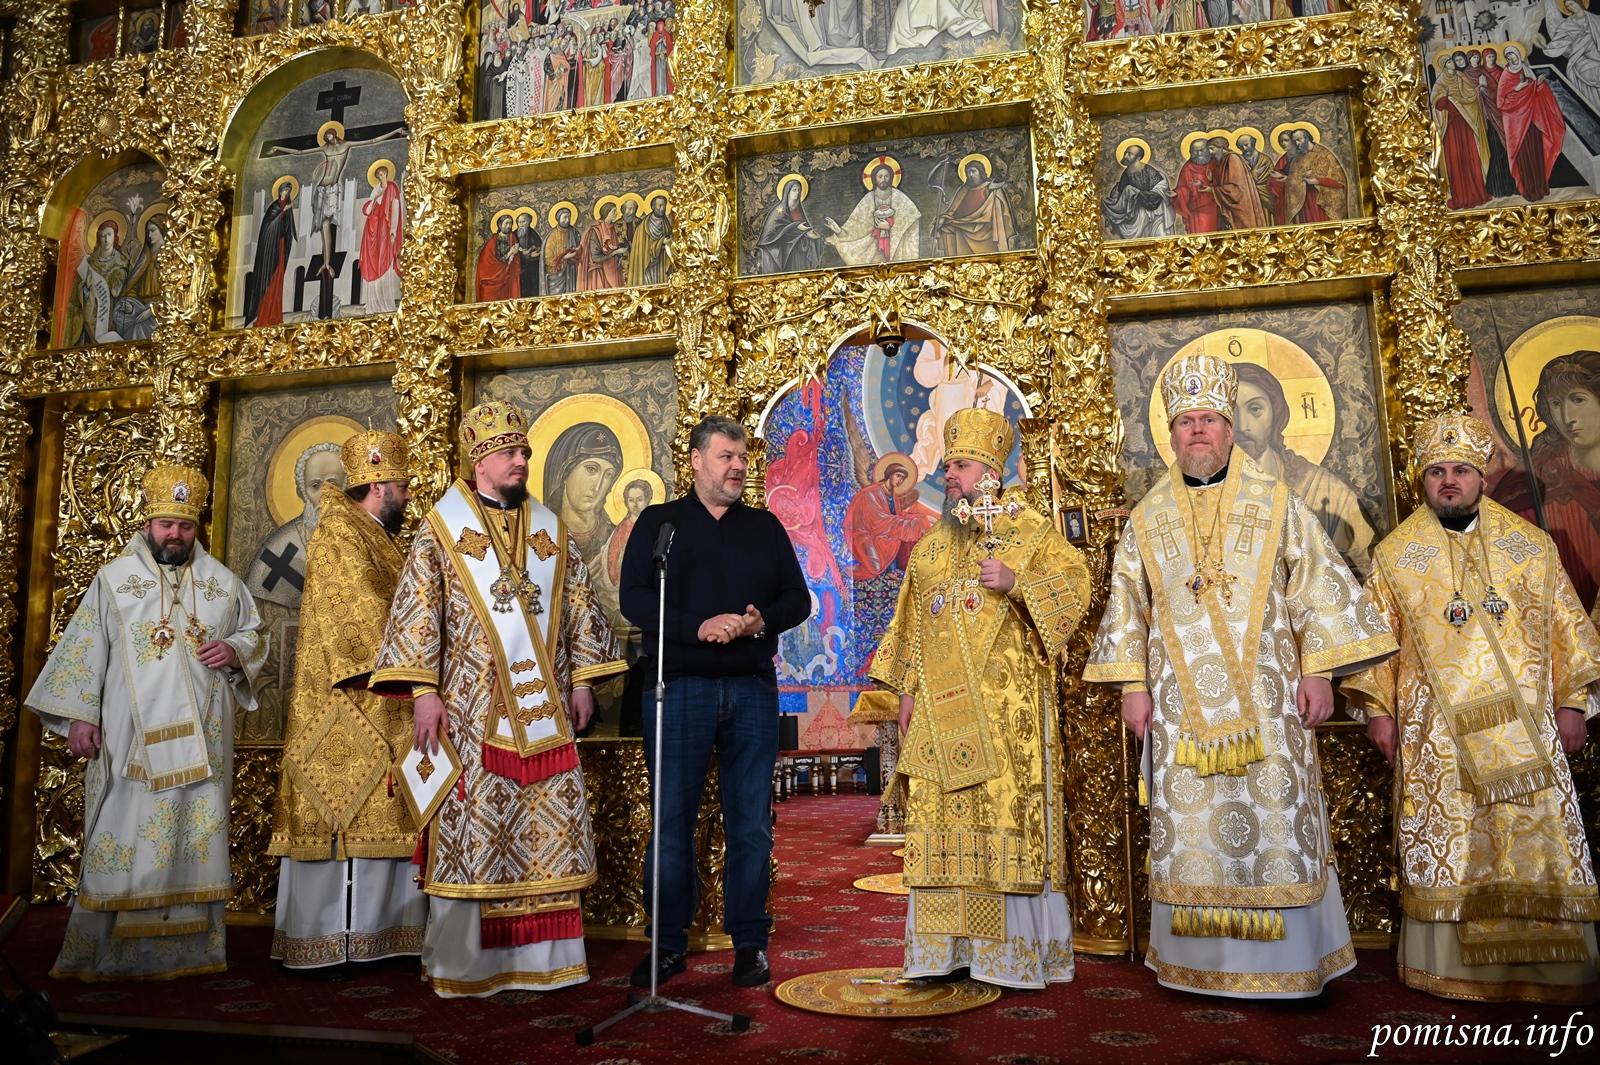 Metropolitan of Kyiv visited Eparchy of Zhytomyr and Ovruch